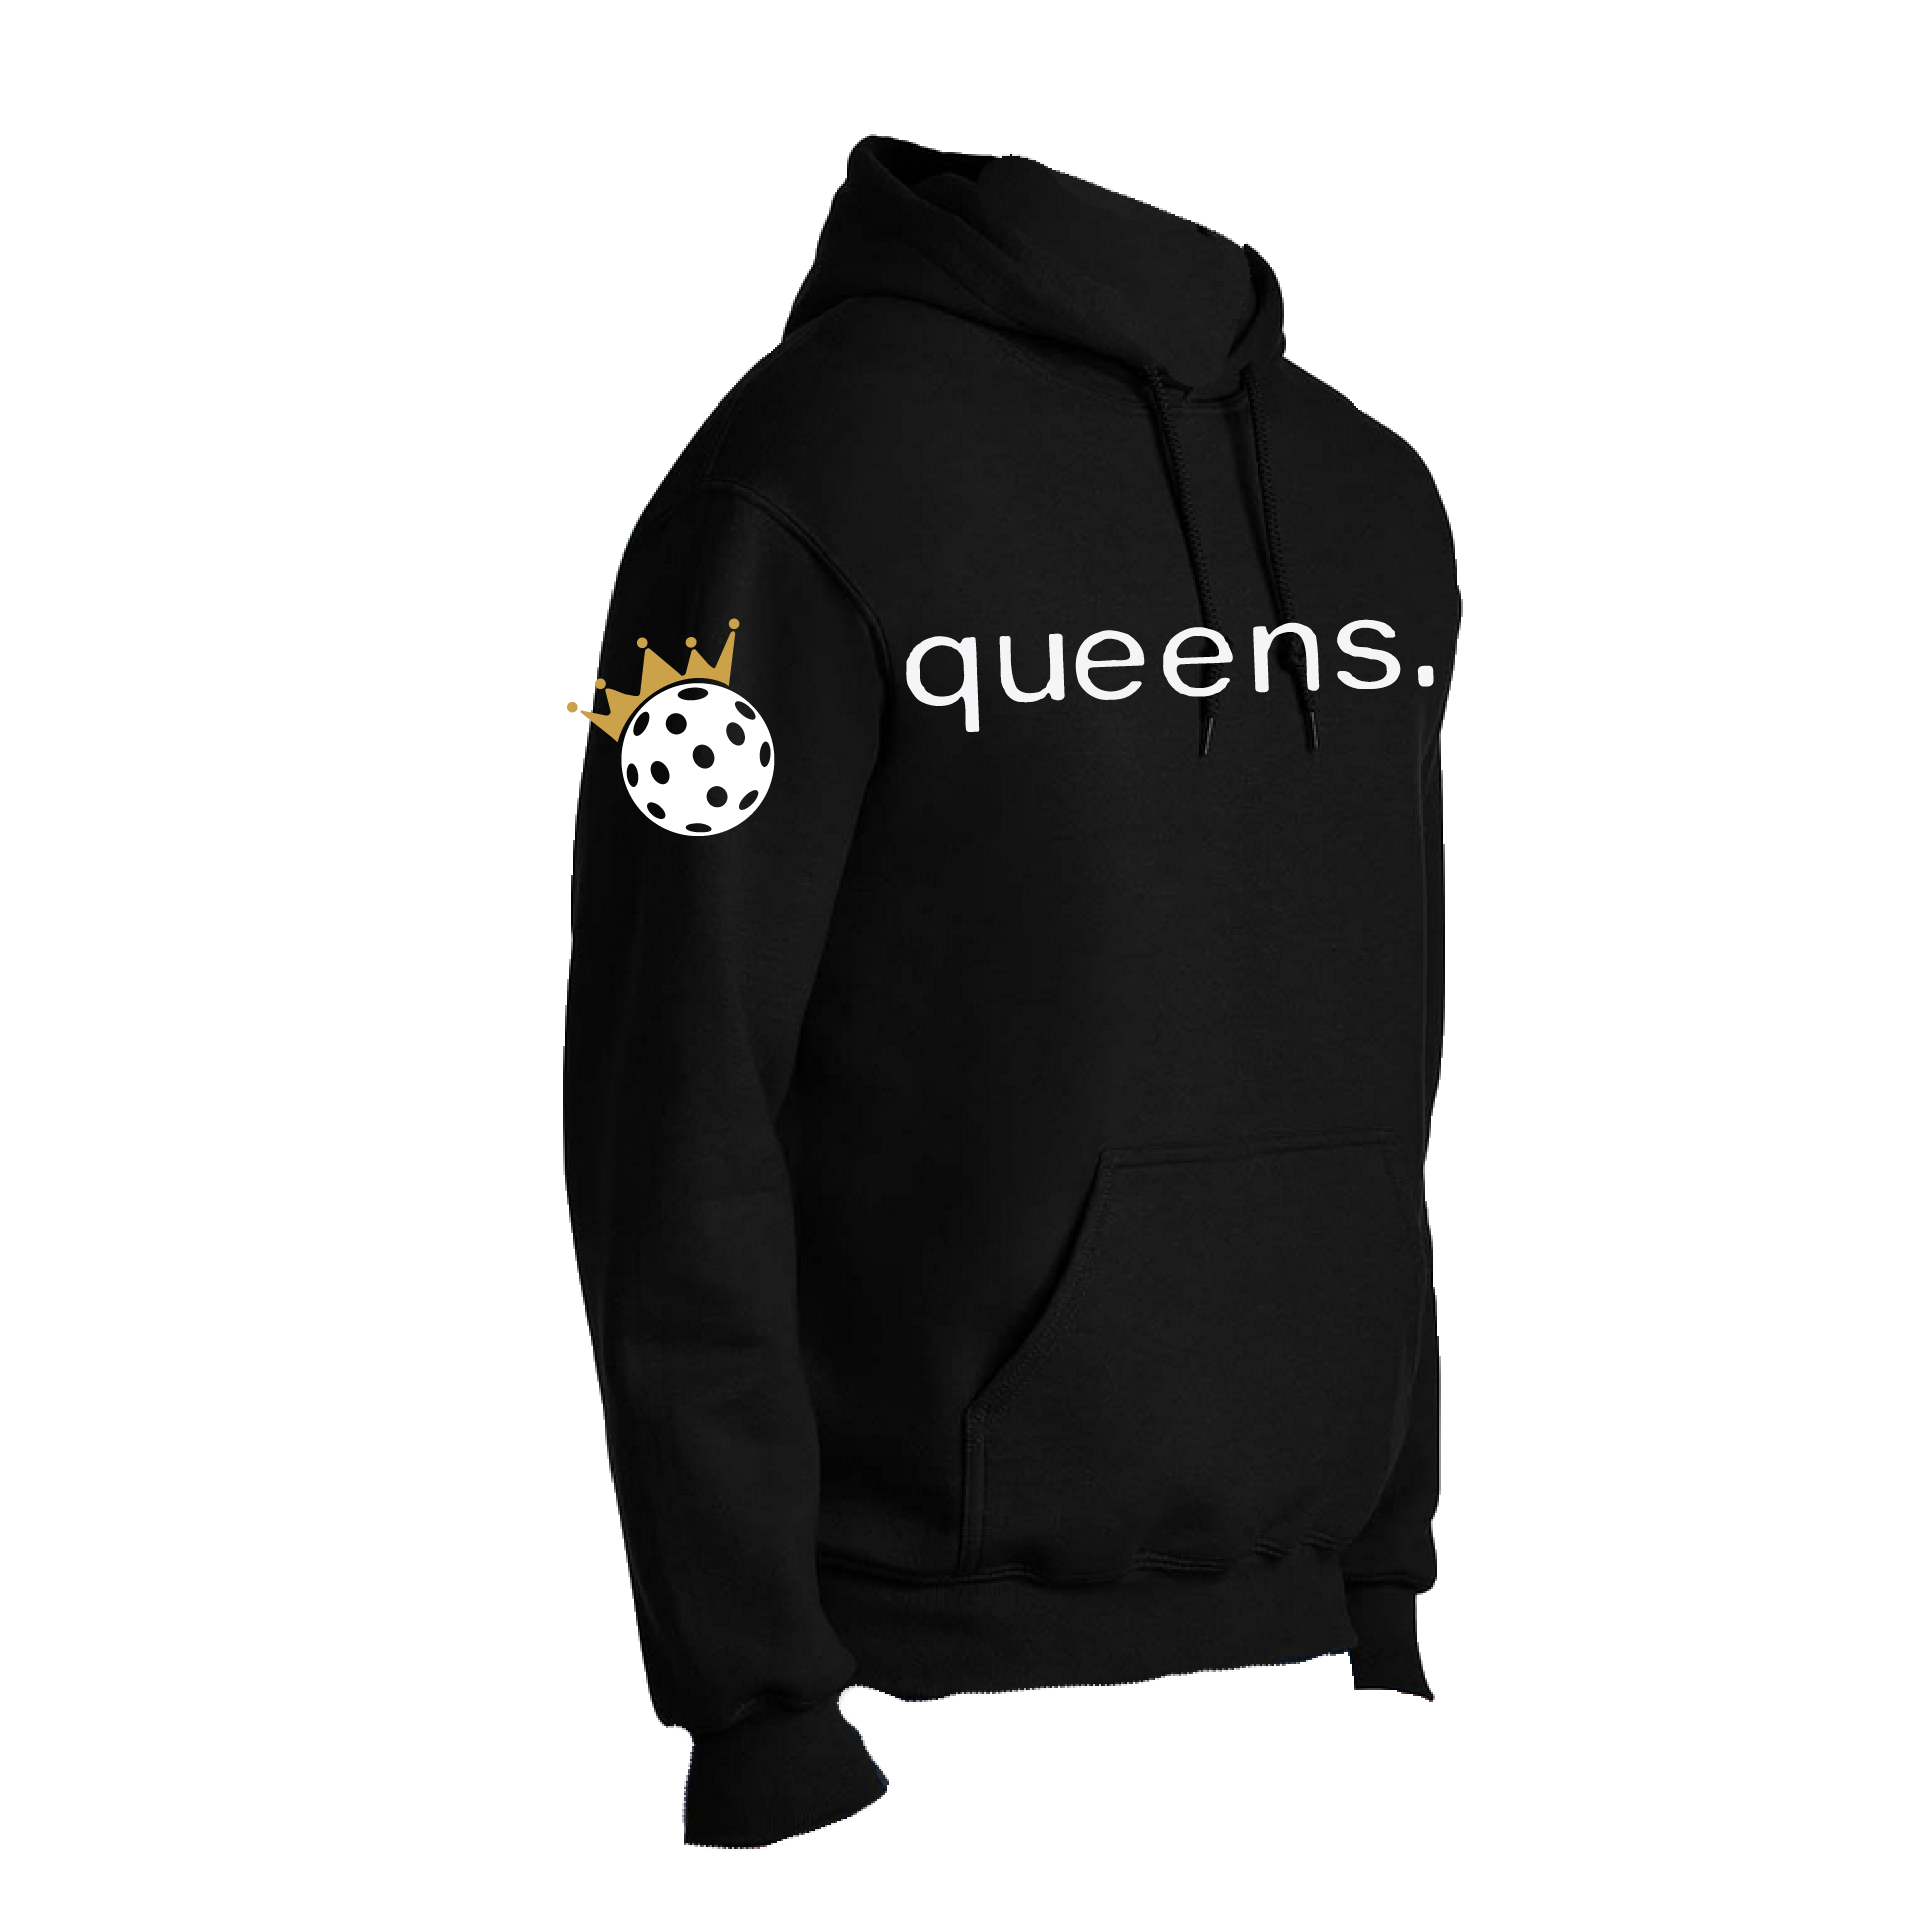 Design: Pickleball Queen with Crown  This unisex hooded sweatshirt is designed with the Pickleball Queen and Crown in mind, utilizing moisture-wicking and double lining features. A front pouch pocket ensures additional warmth, keeping you comfortable on the Pickleball courts with a unique look. Step up your game in this fashionably functional hoodie